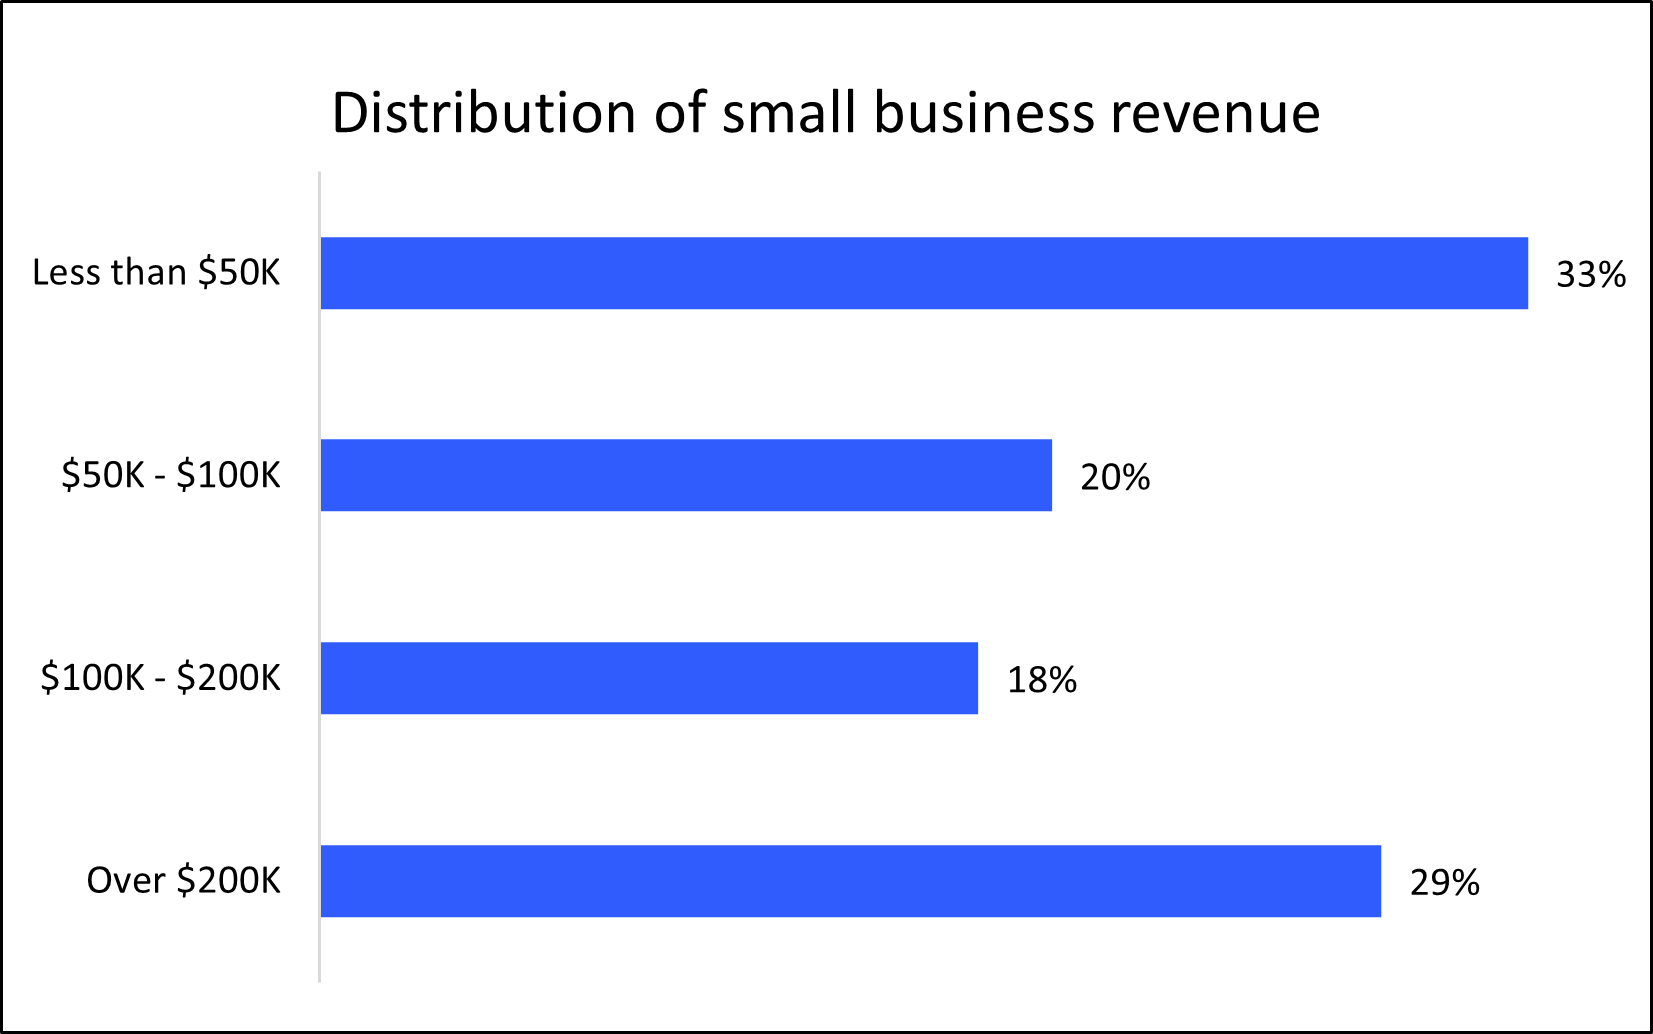 Distribution of small business revenue for Insureon customers.